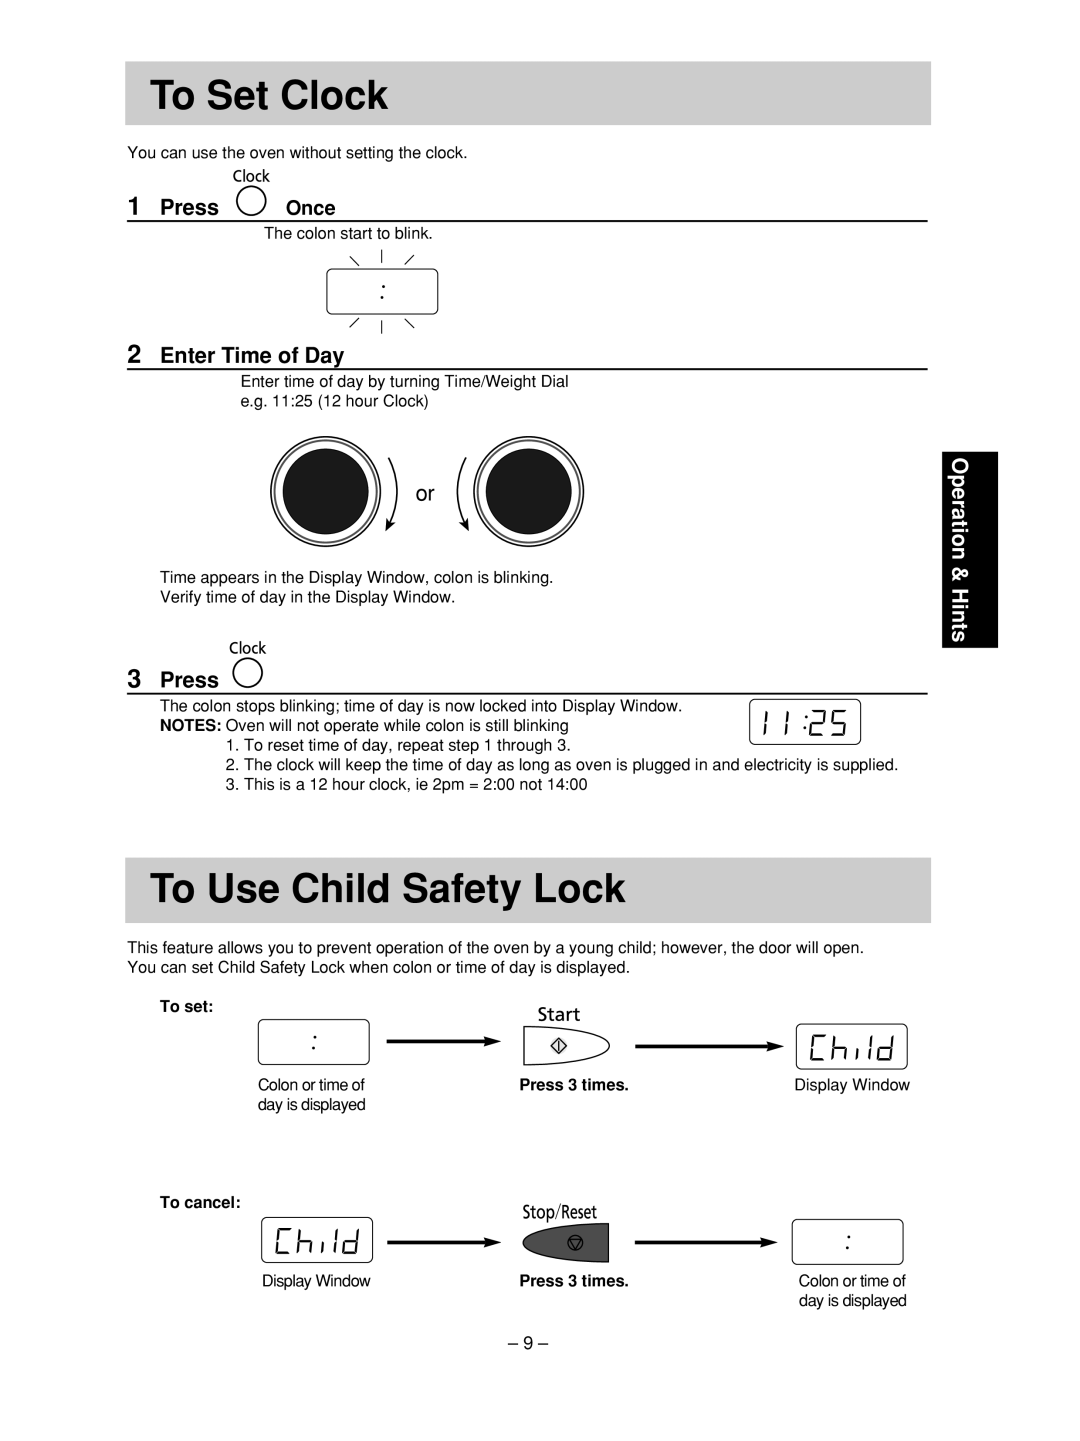 Panasonic NN-SD376S manual To Set Clock, To Use Child Safety Lock, Press Once, Enter Time of Day 